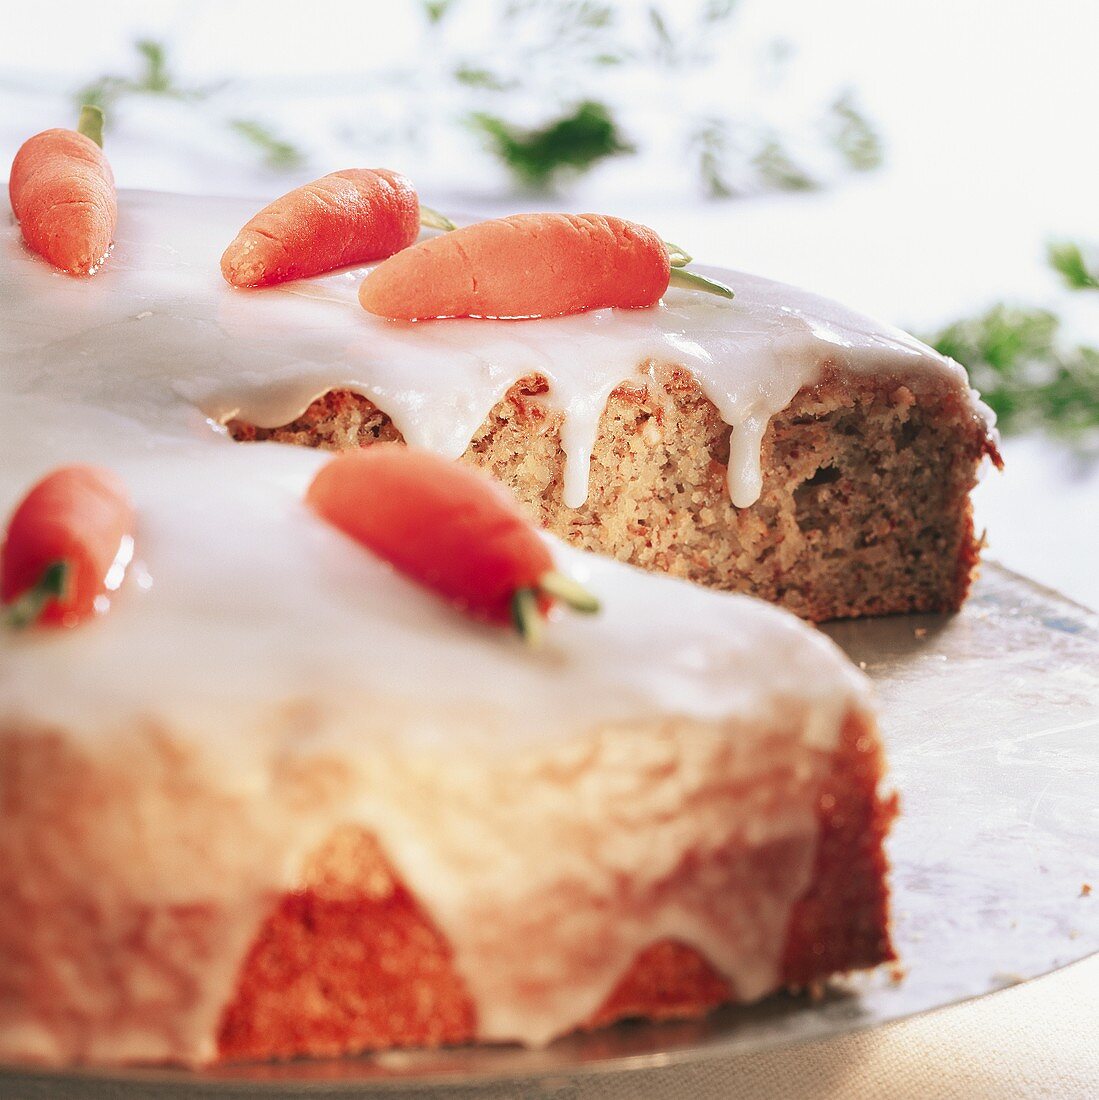 Carrot cake with marzipan carrots